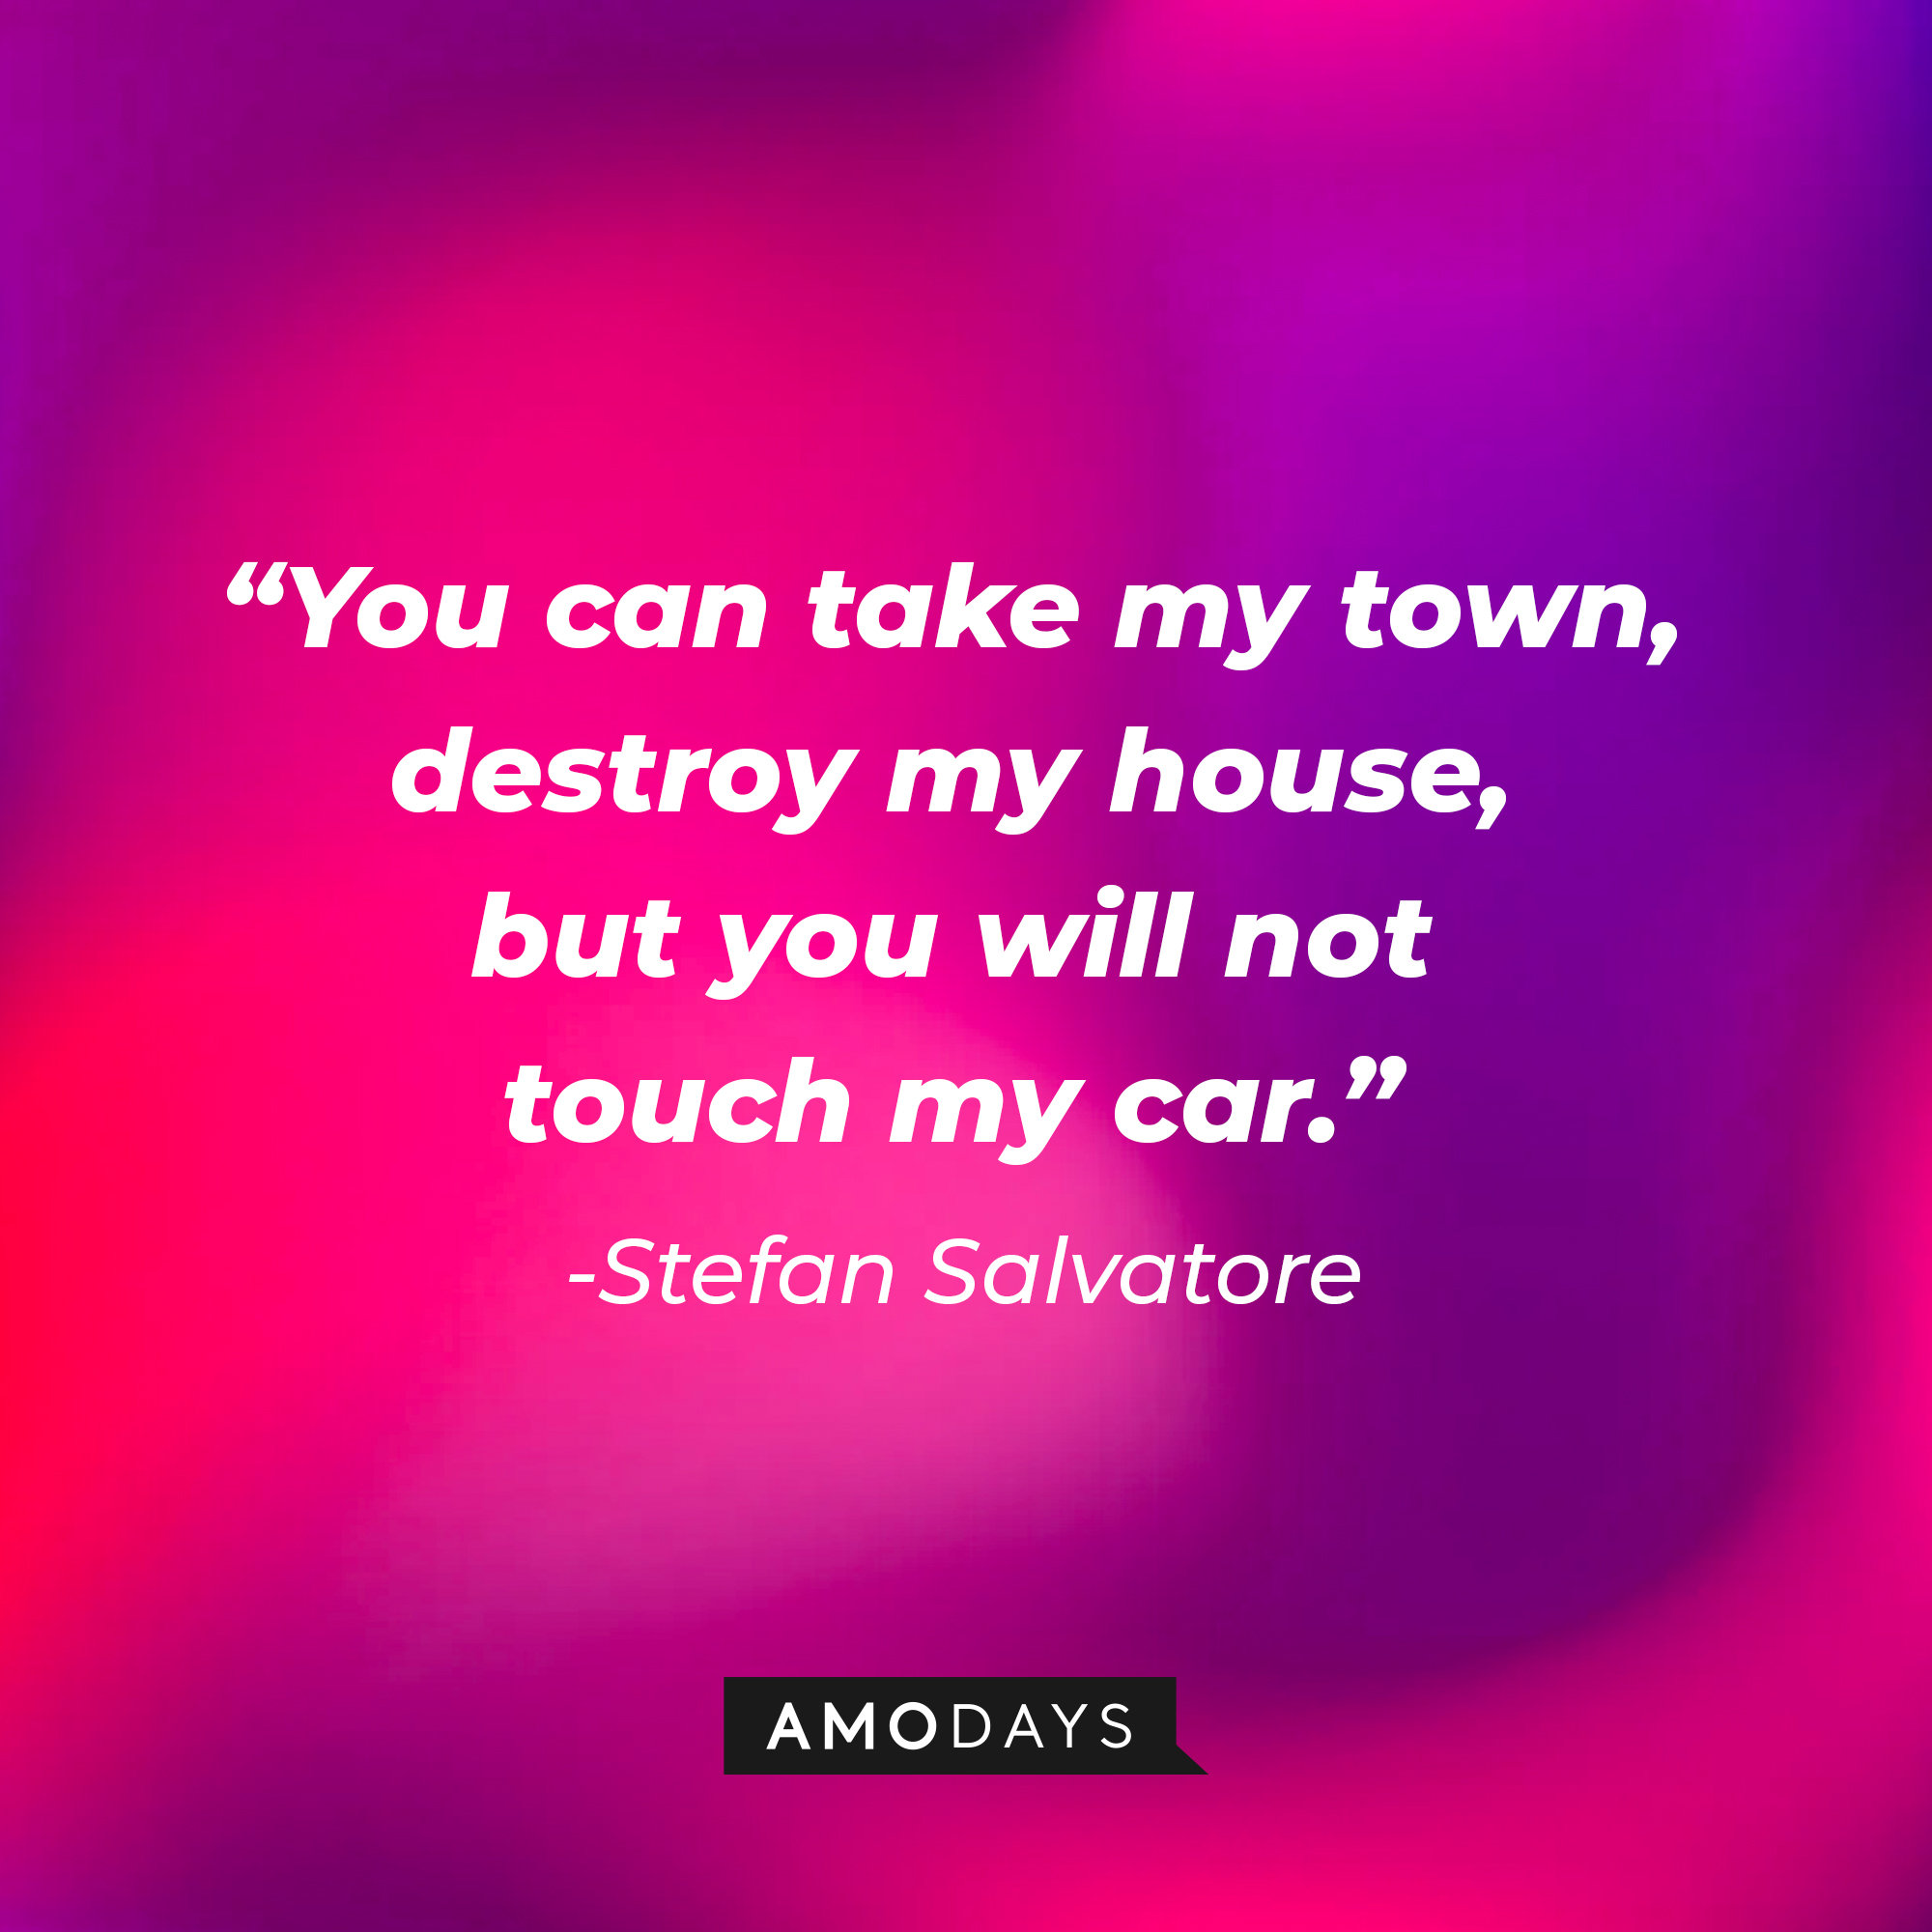 Stefan Salvatore's quote: "You can take my town, destroy my house, but you will not touch my car." | Source: AmoDays